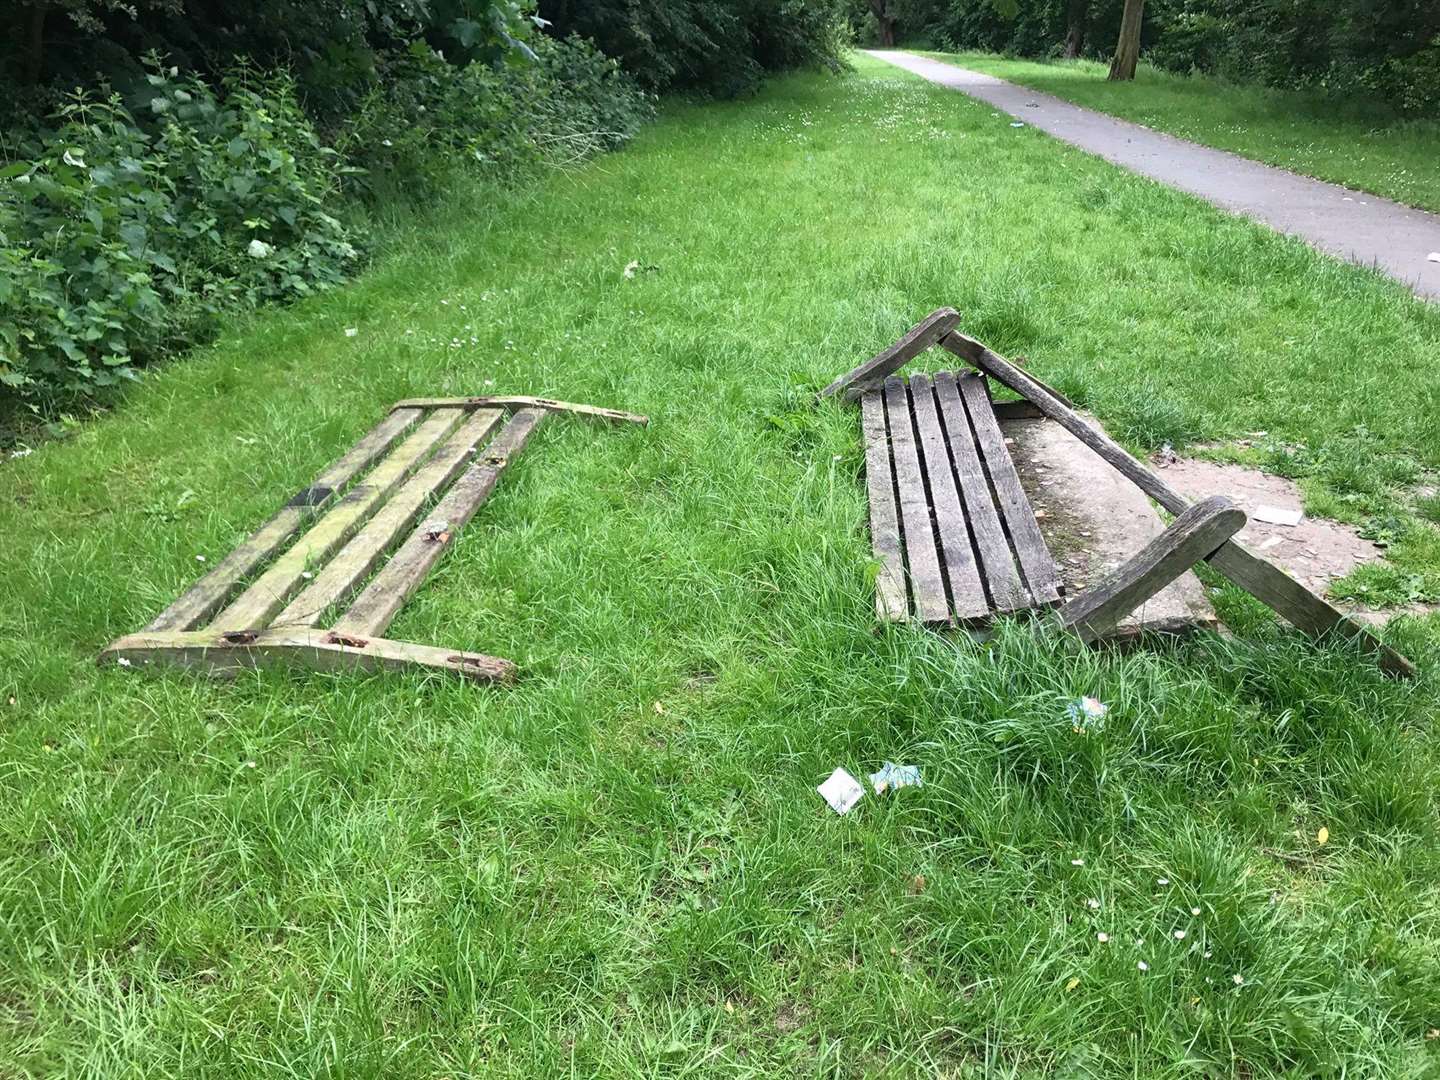 The bench was destroyed